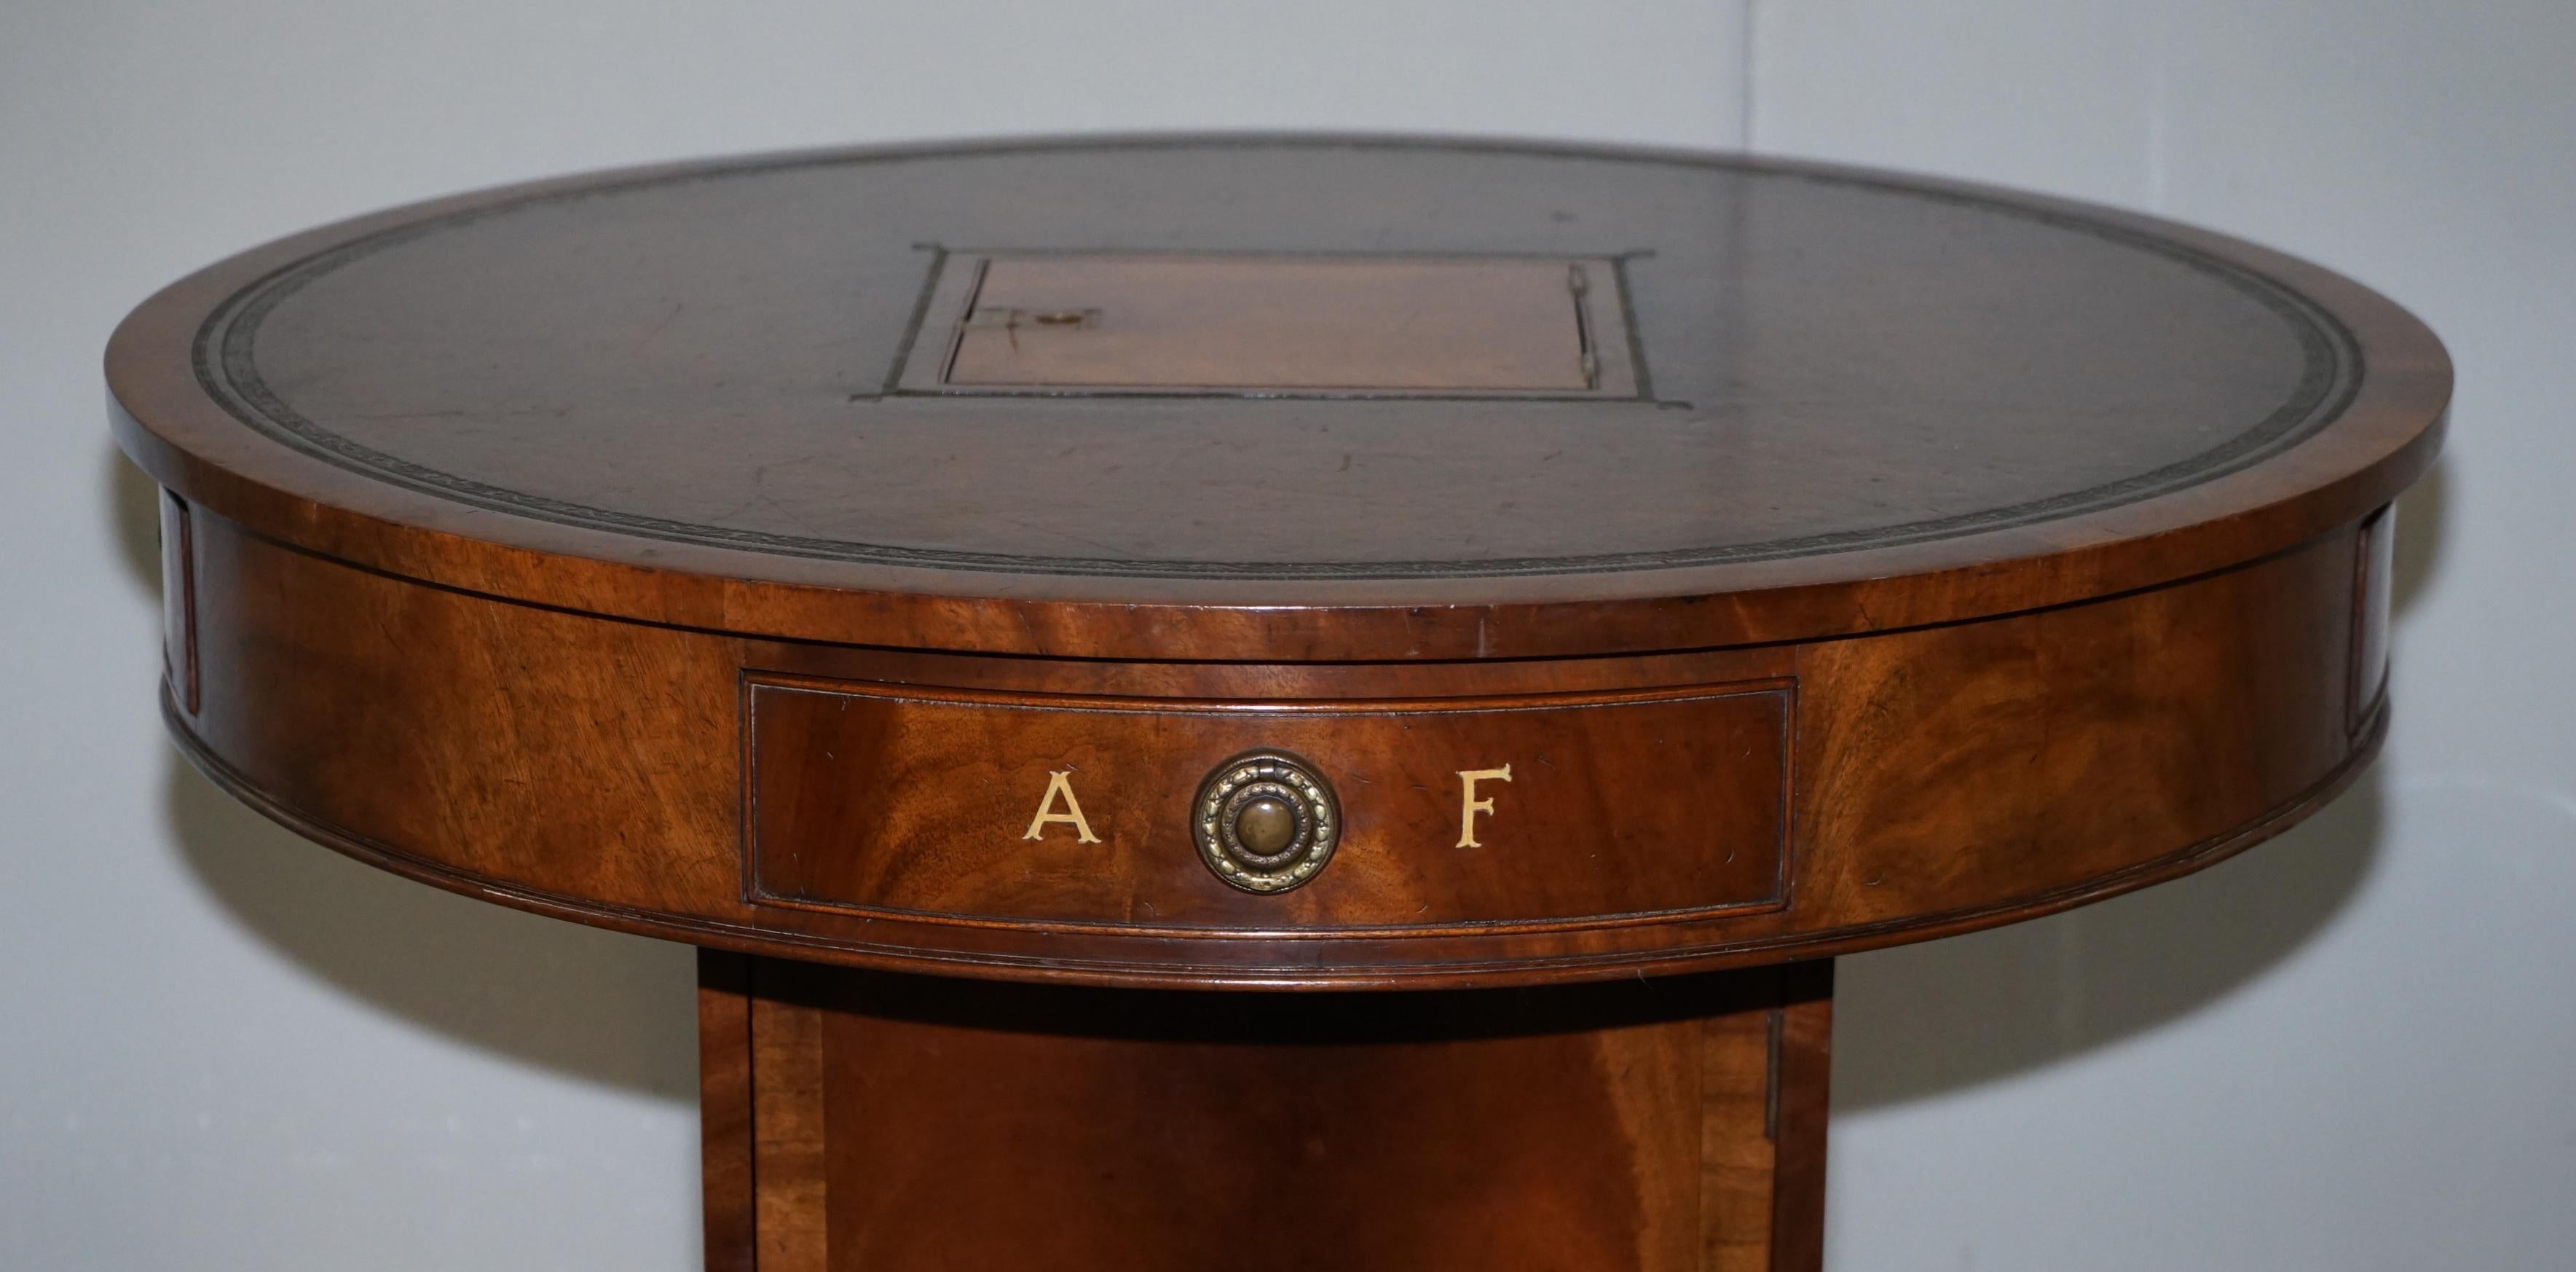 English Antique Victorian Flamed Hardwood Revolving Rent Drum Table Brown Leather Top For Sale